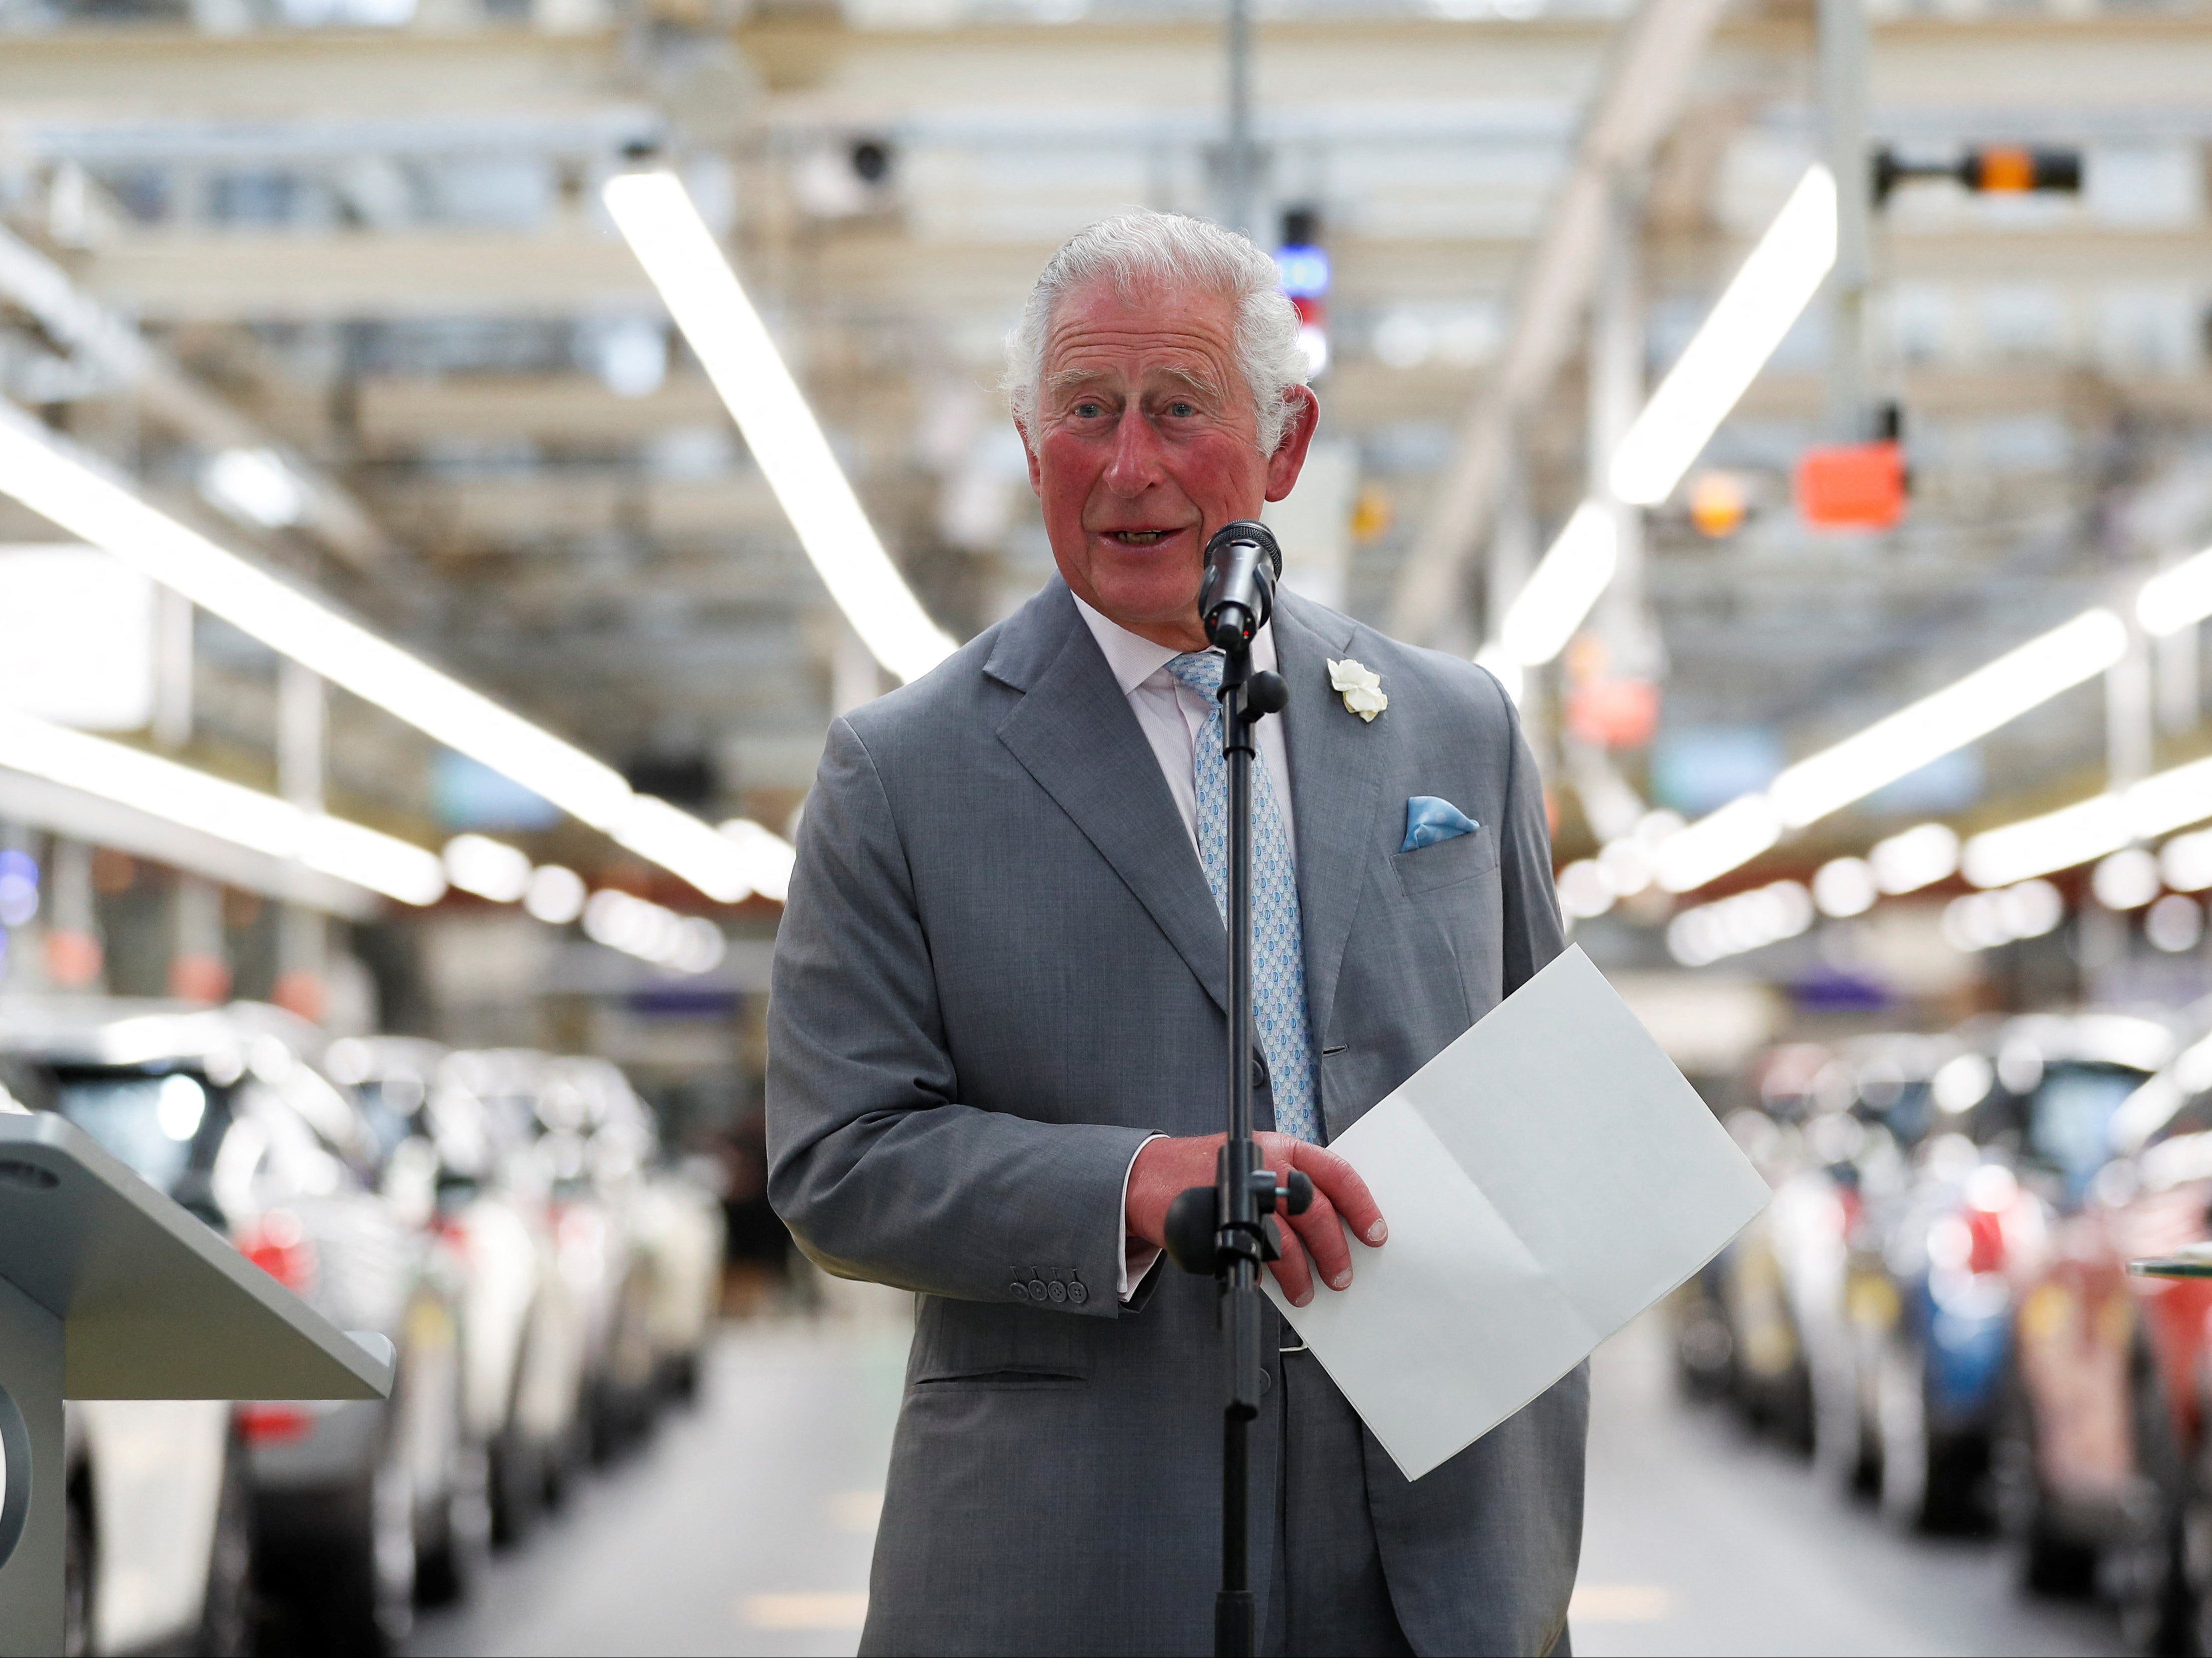 The Duke of Cornwall said growth must be sustainable